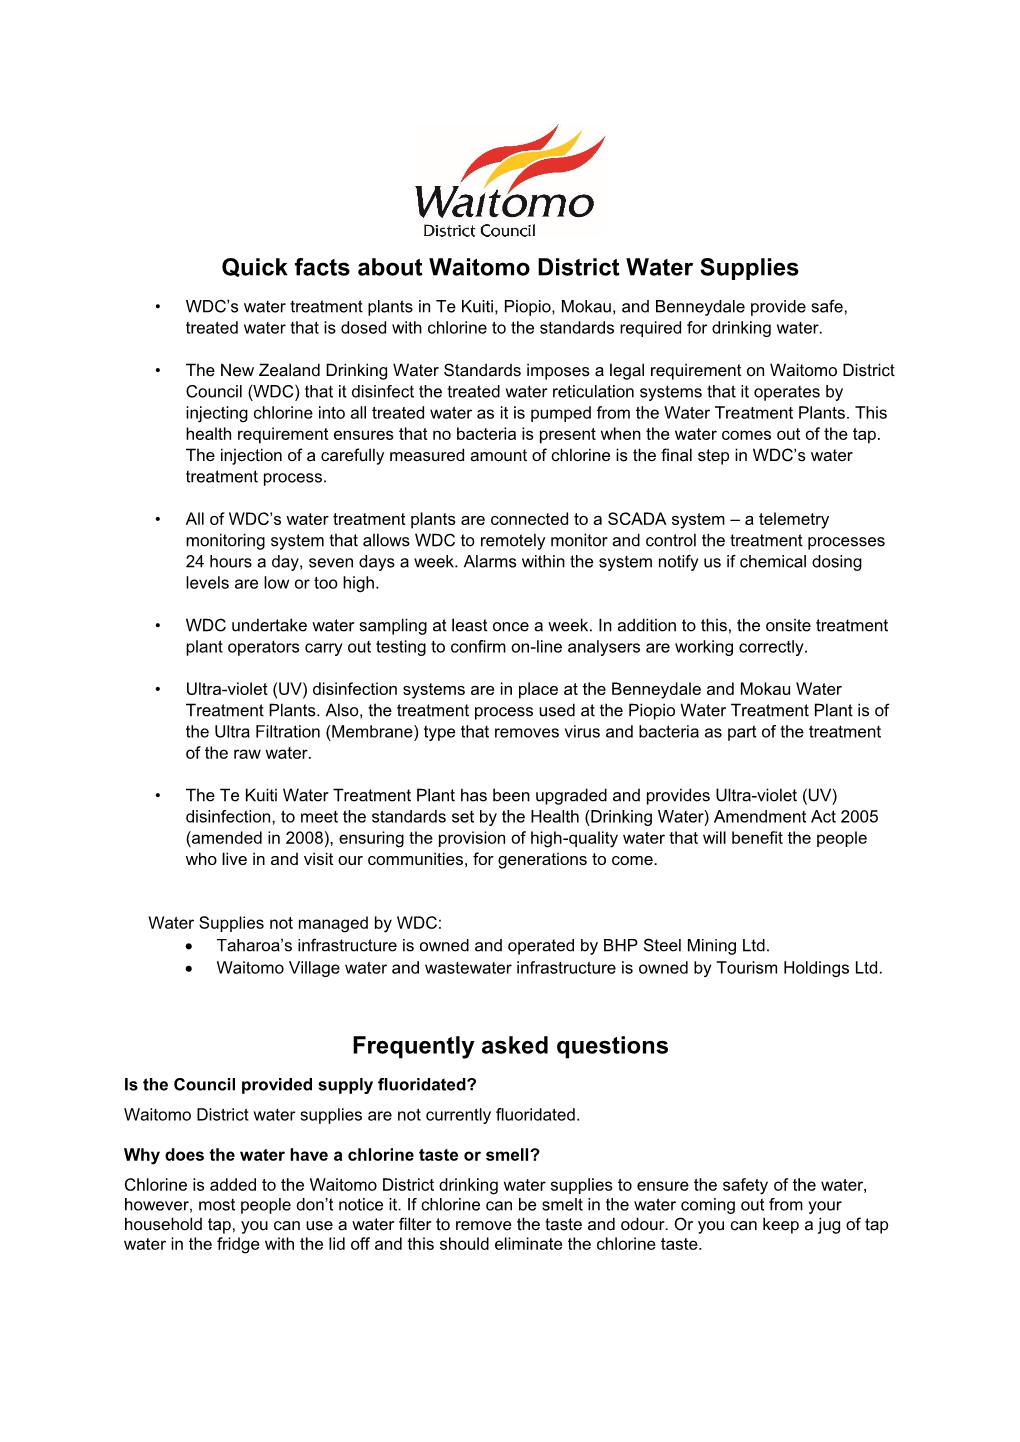 Quick Facts About Waitomo District Water Supplies